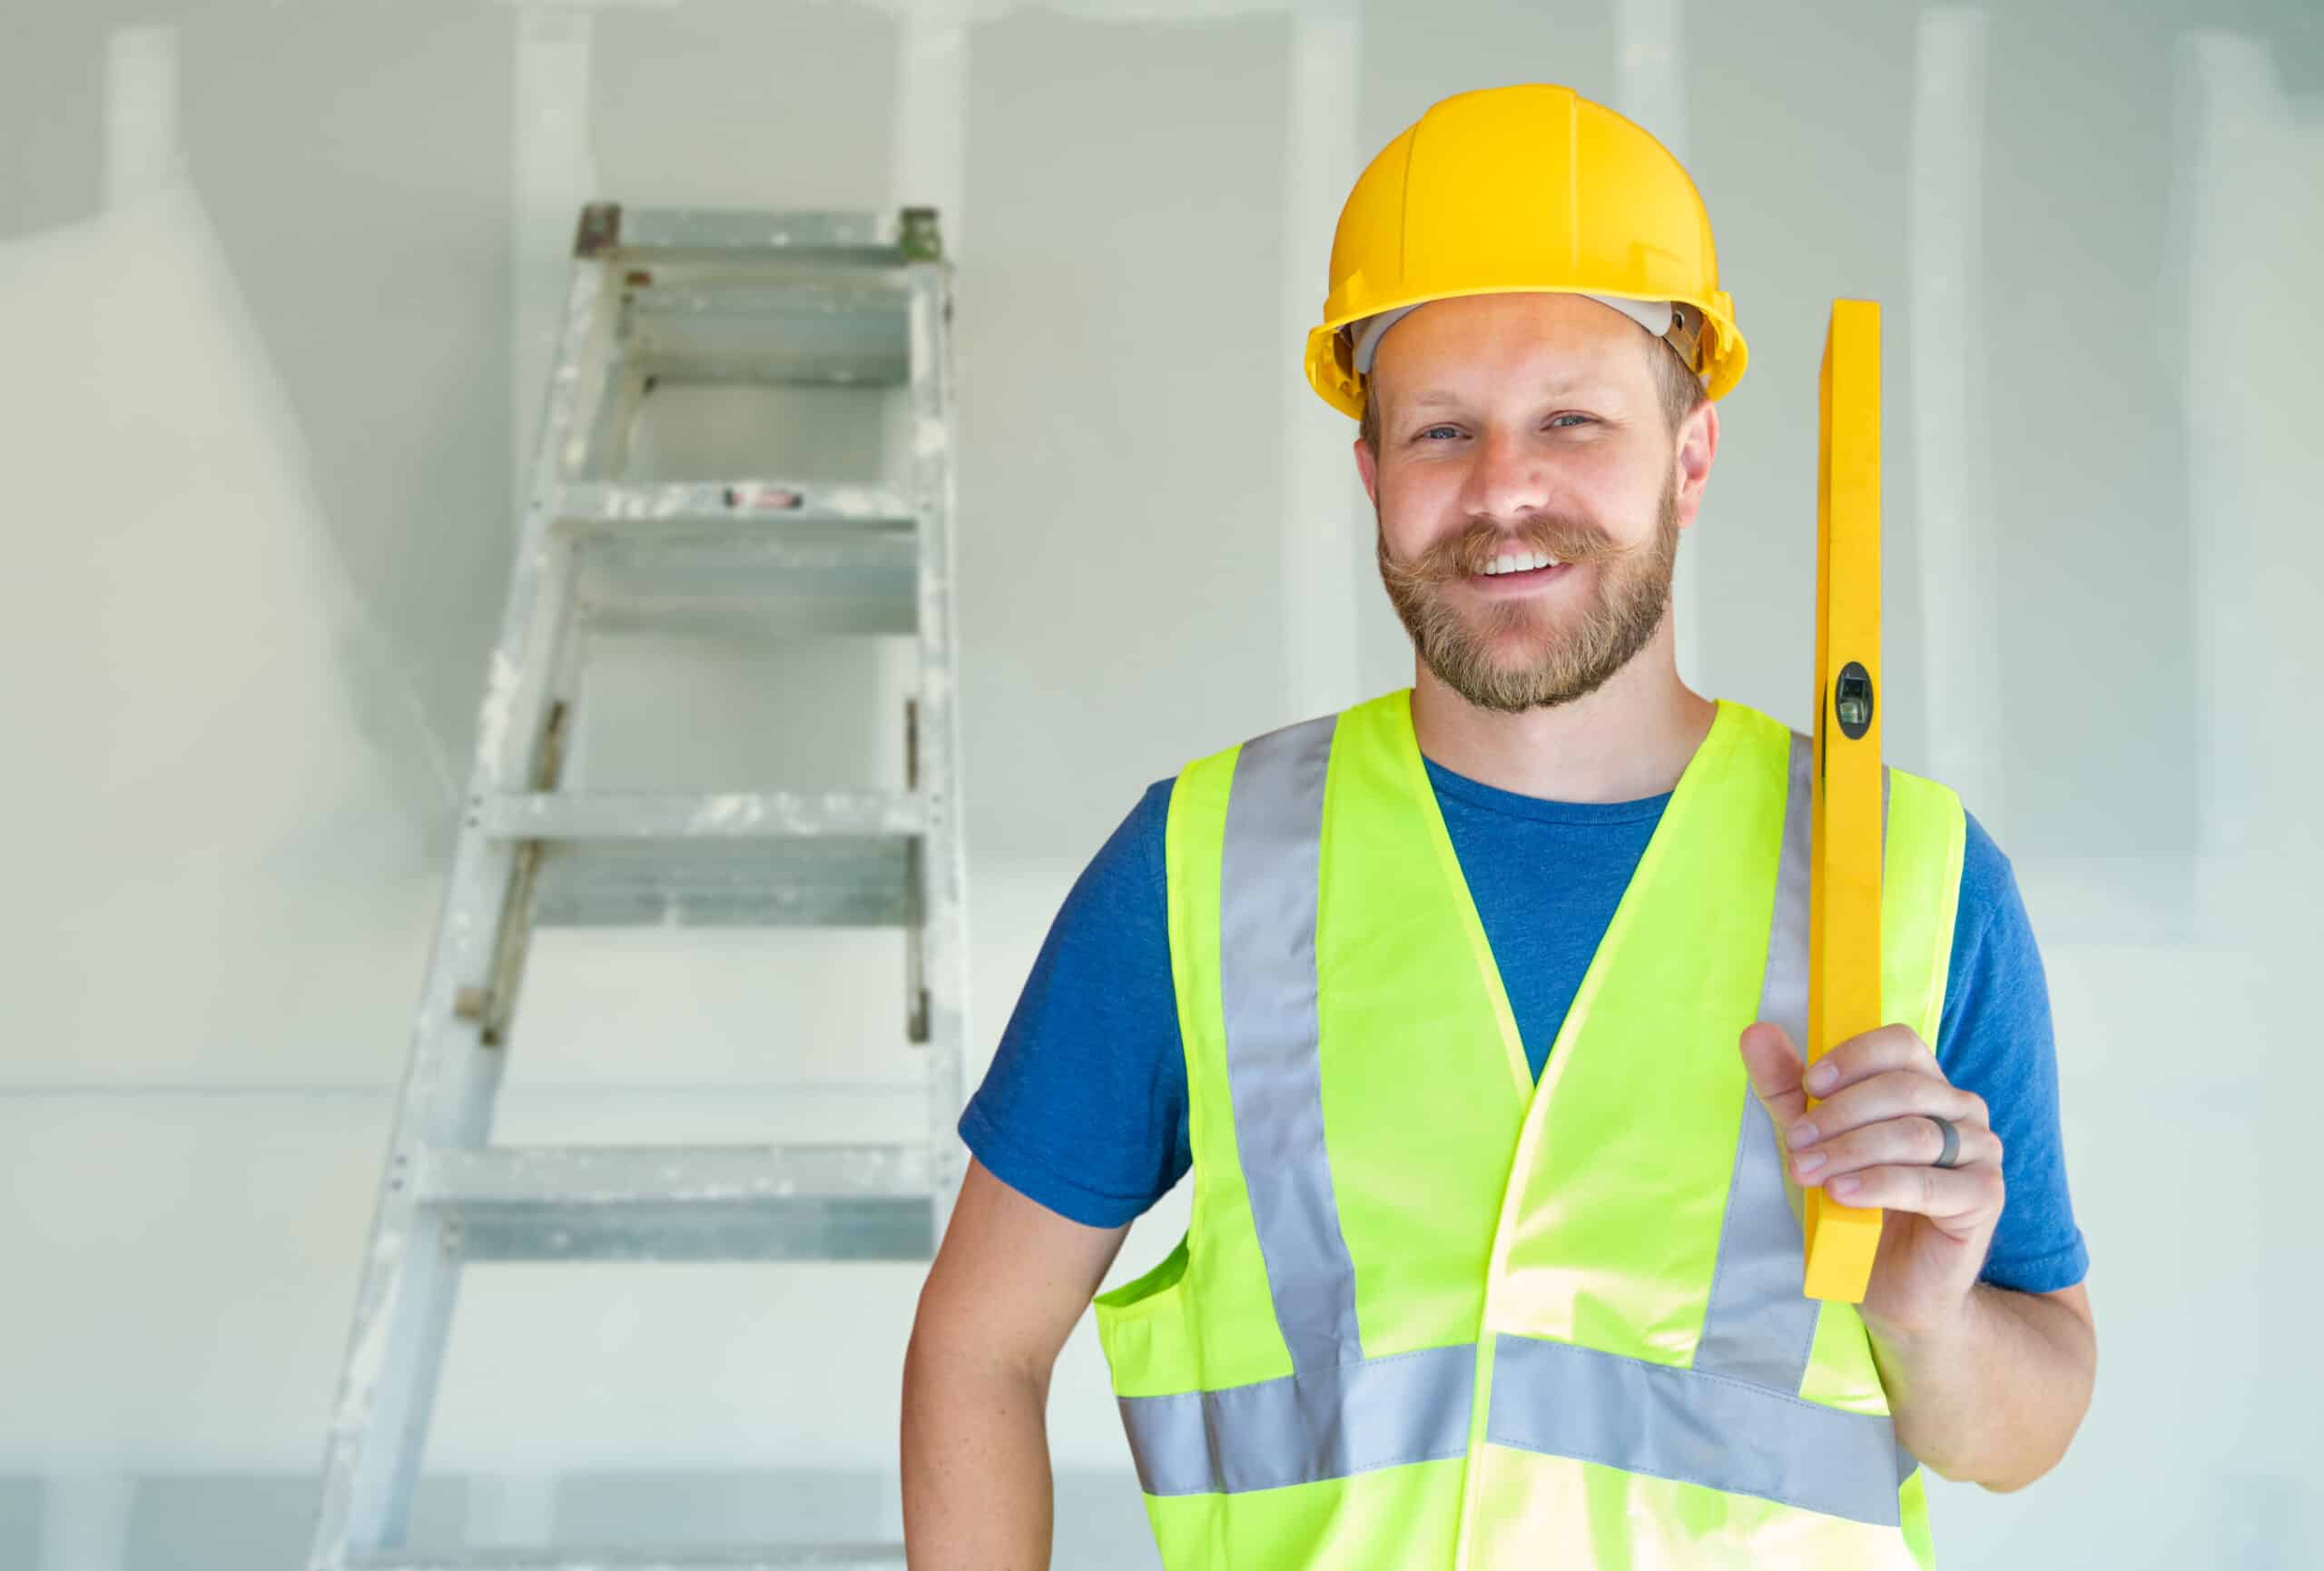 Your competitors are tough when you're a home improvement contractor. This contractor is considering all the ways to edge out the competition while wearing a bright safety vest, yellow hard hat, and holding a yellow level.